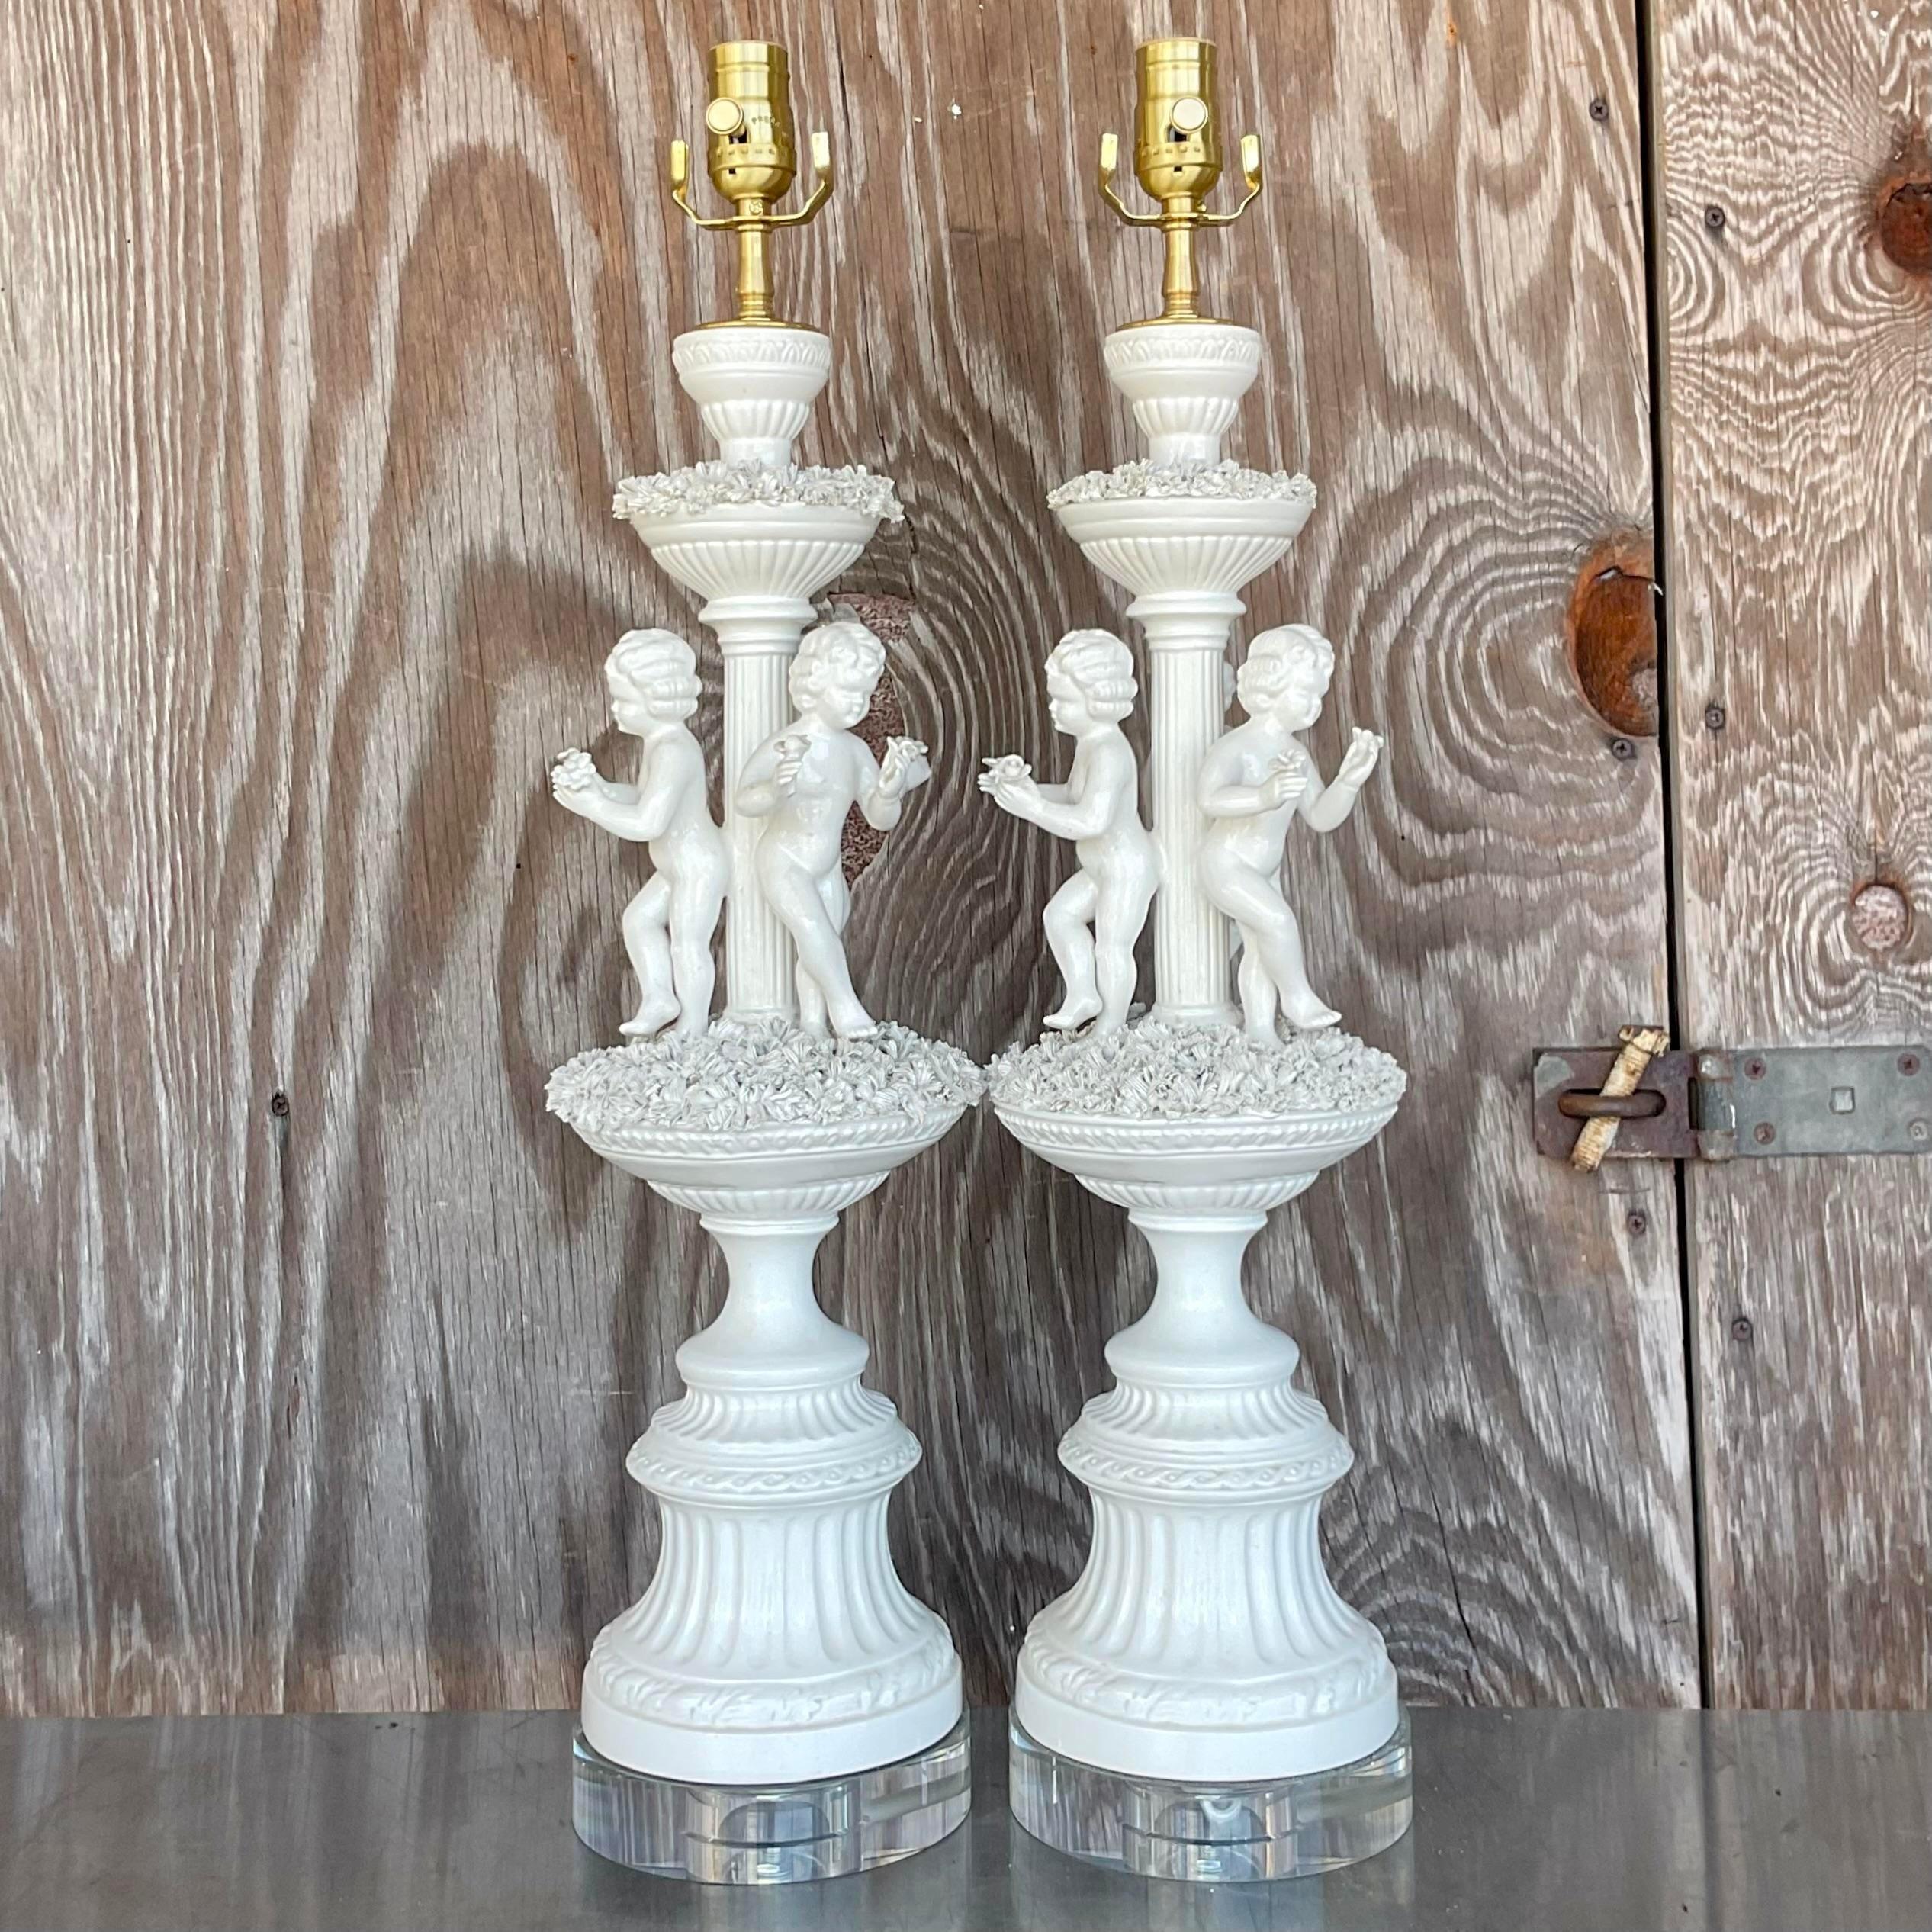 20th Century Vintage Regency Glazed Ceramic Putti Style Lamps - a Pair For Sale